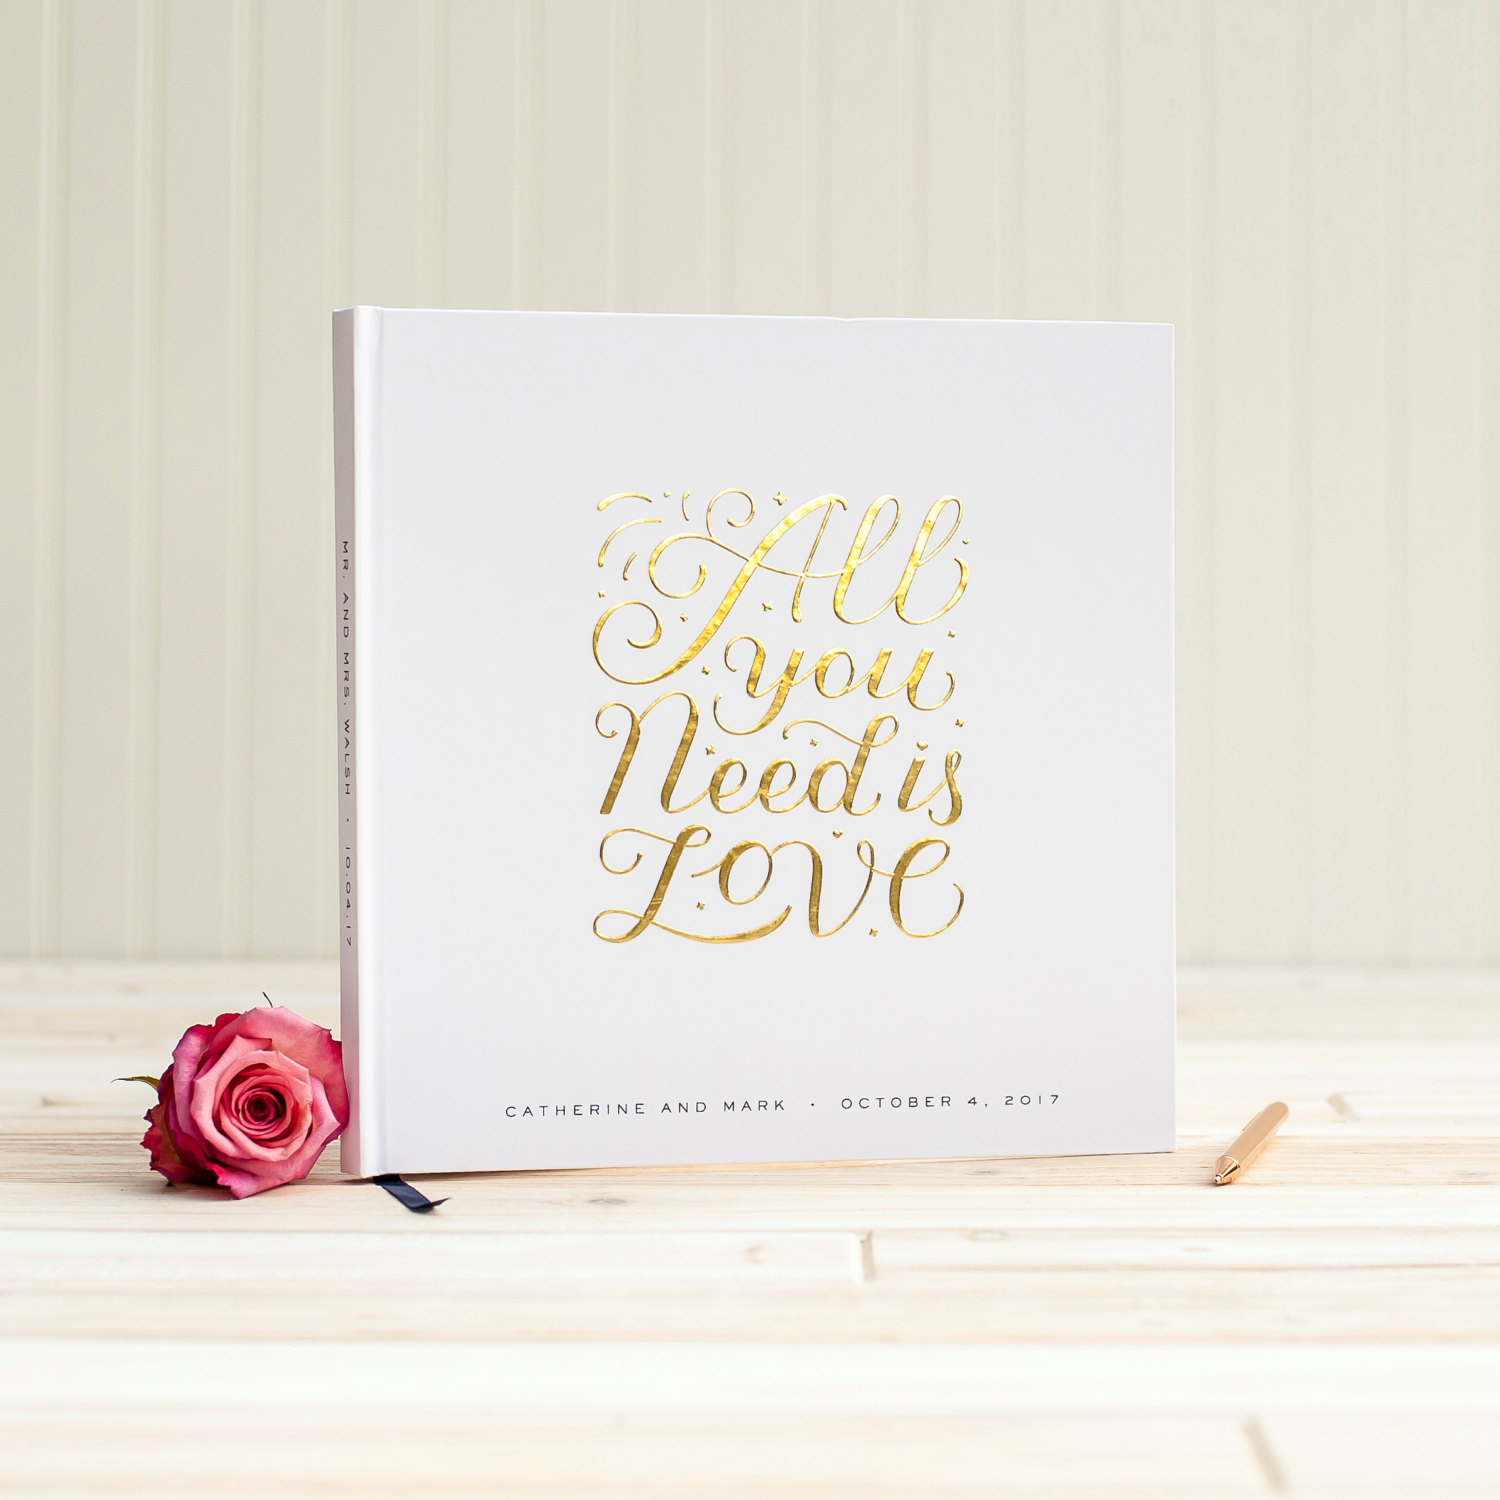 Gold Foil Guest Books - made from real foil! By Starboard Press. | https://emmalinebride.com/wedding/gold-foil-guest-books/